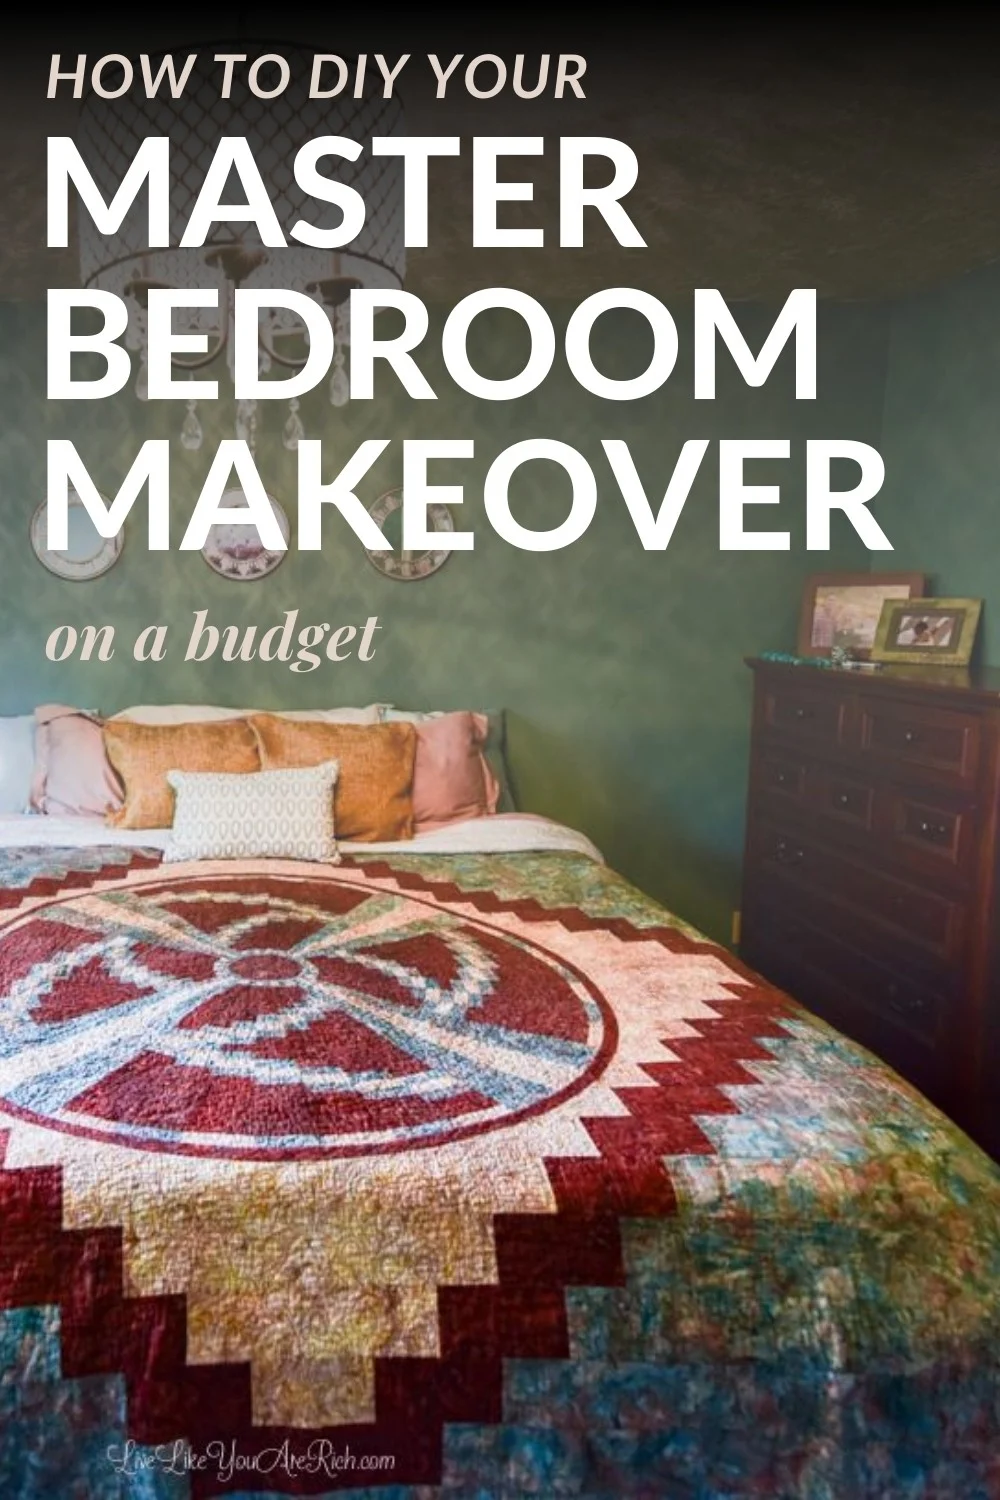 You don’t have to spend a fortune renovating and decorating a master bedroom. I’m sharing how I renovate, furnished and decorated my master bedroom on a budget